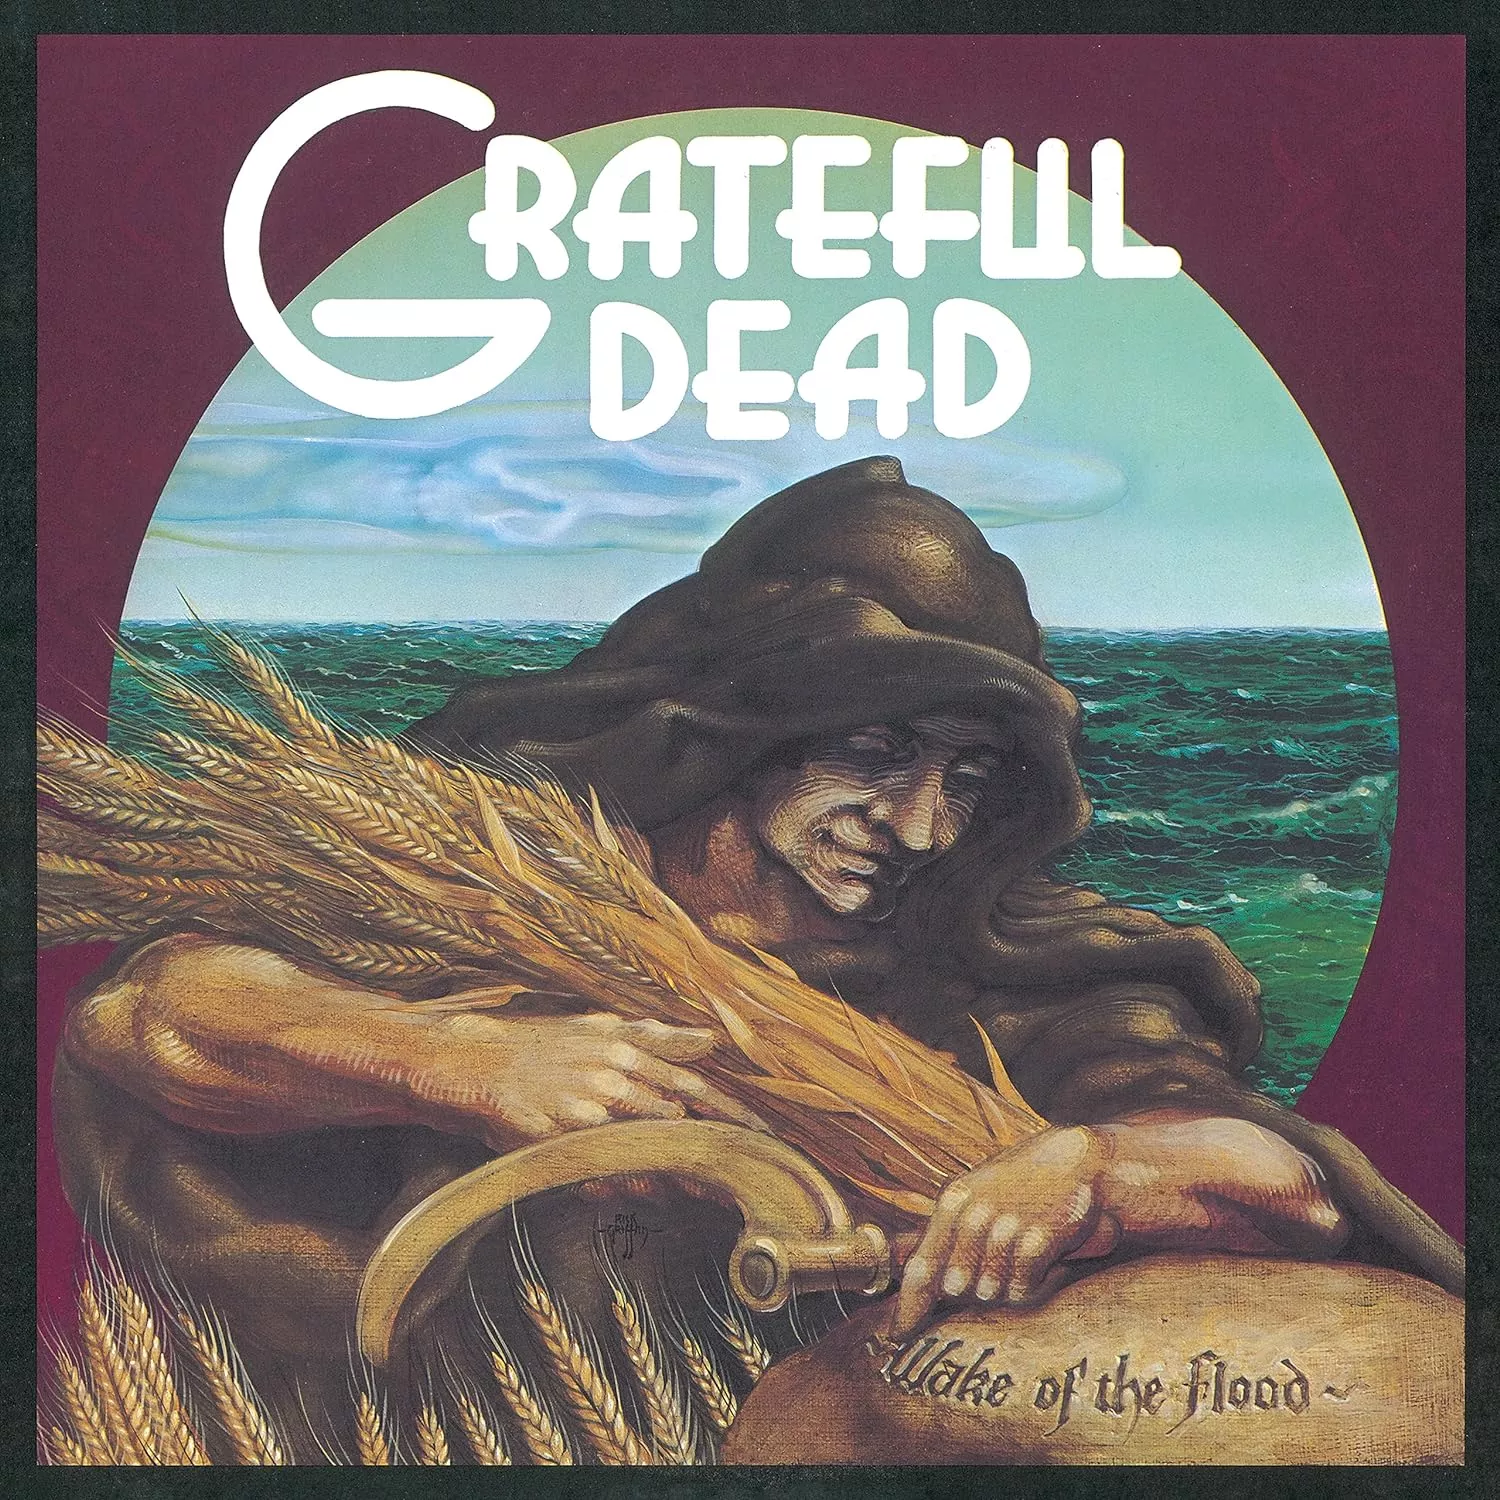  Wake of the Flood (50th Anniversary Deluxe Edition) - Grateful Dead